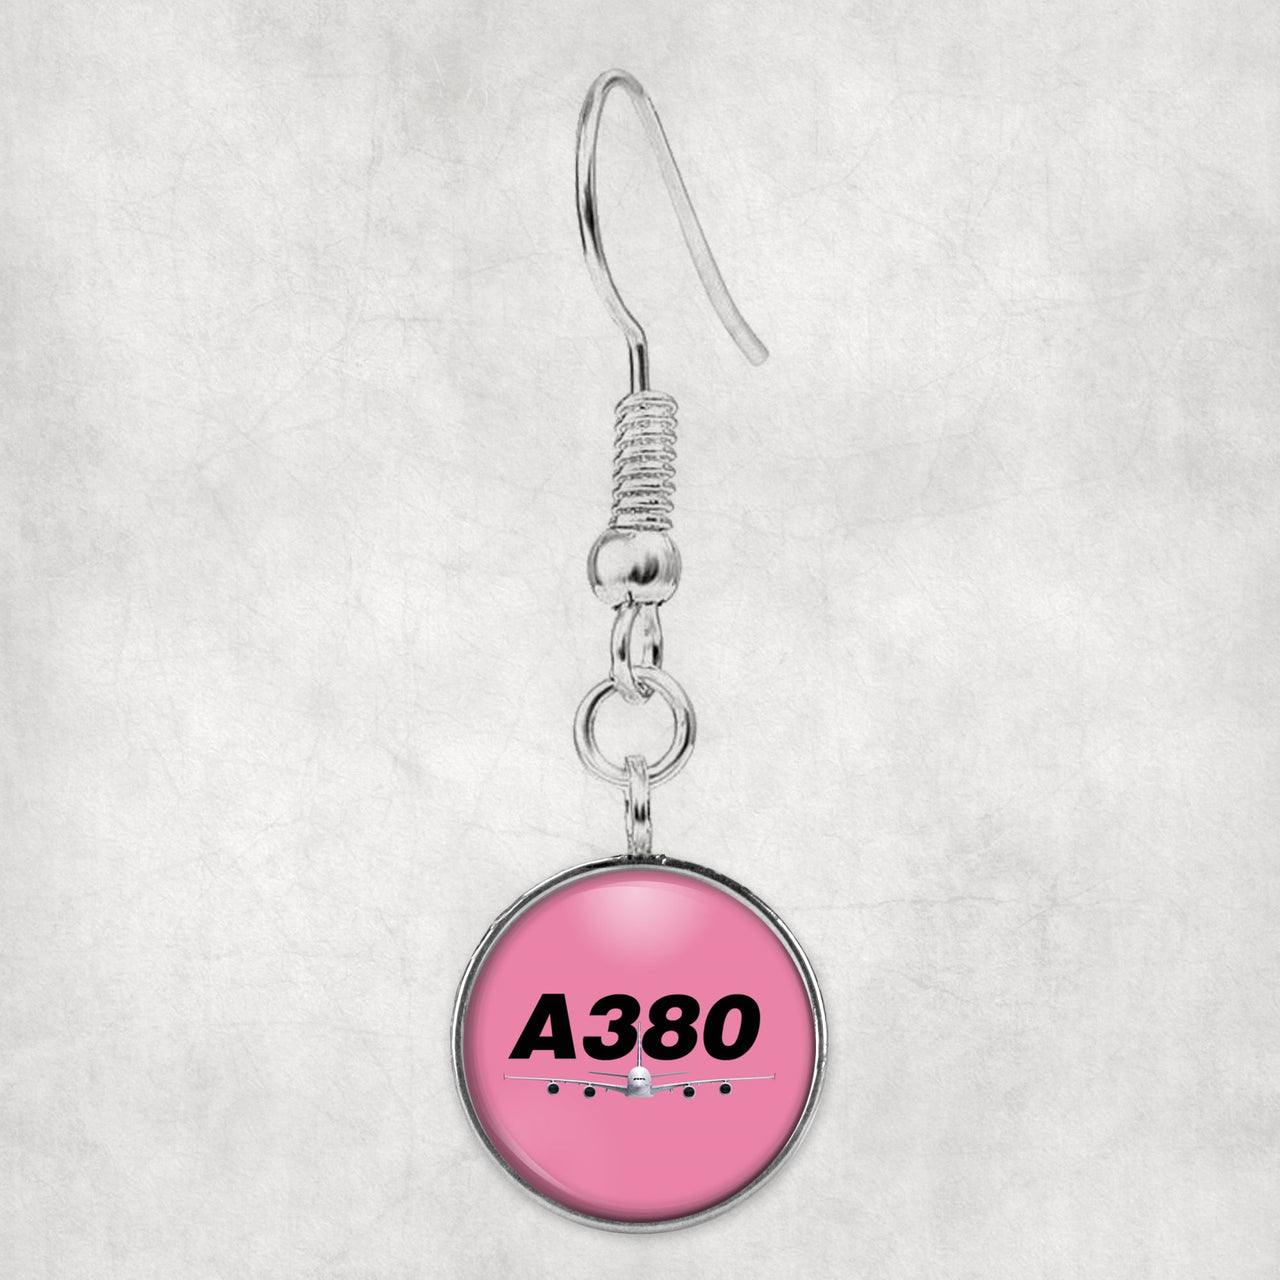 Super Airbus A380 Designed Earrings